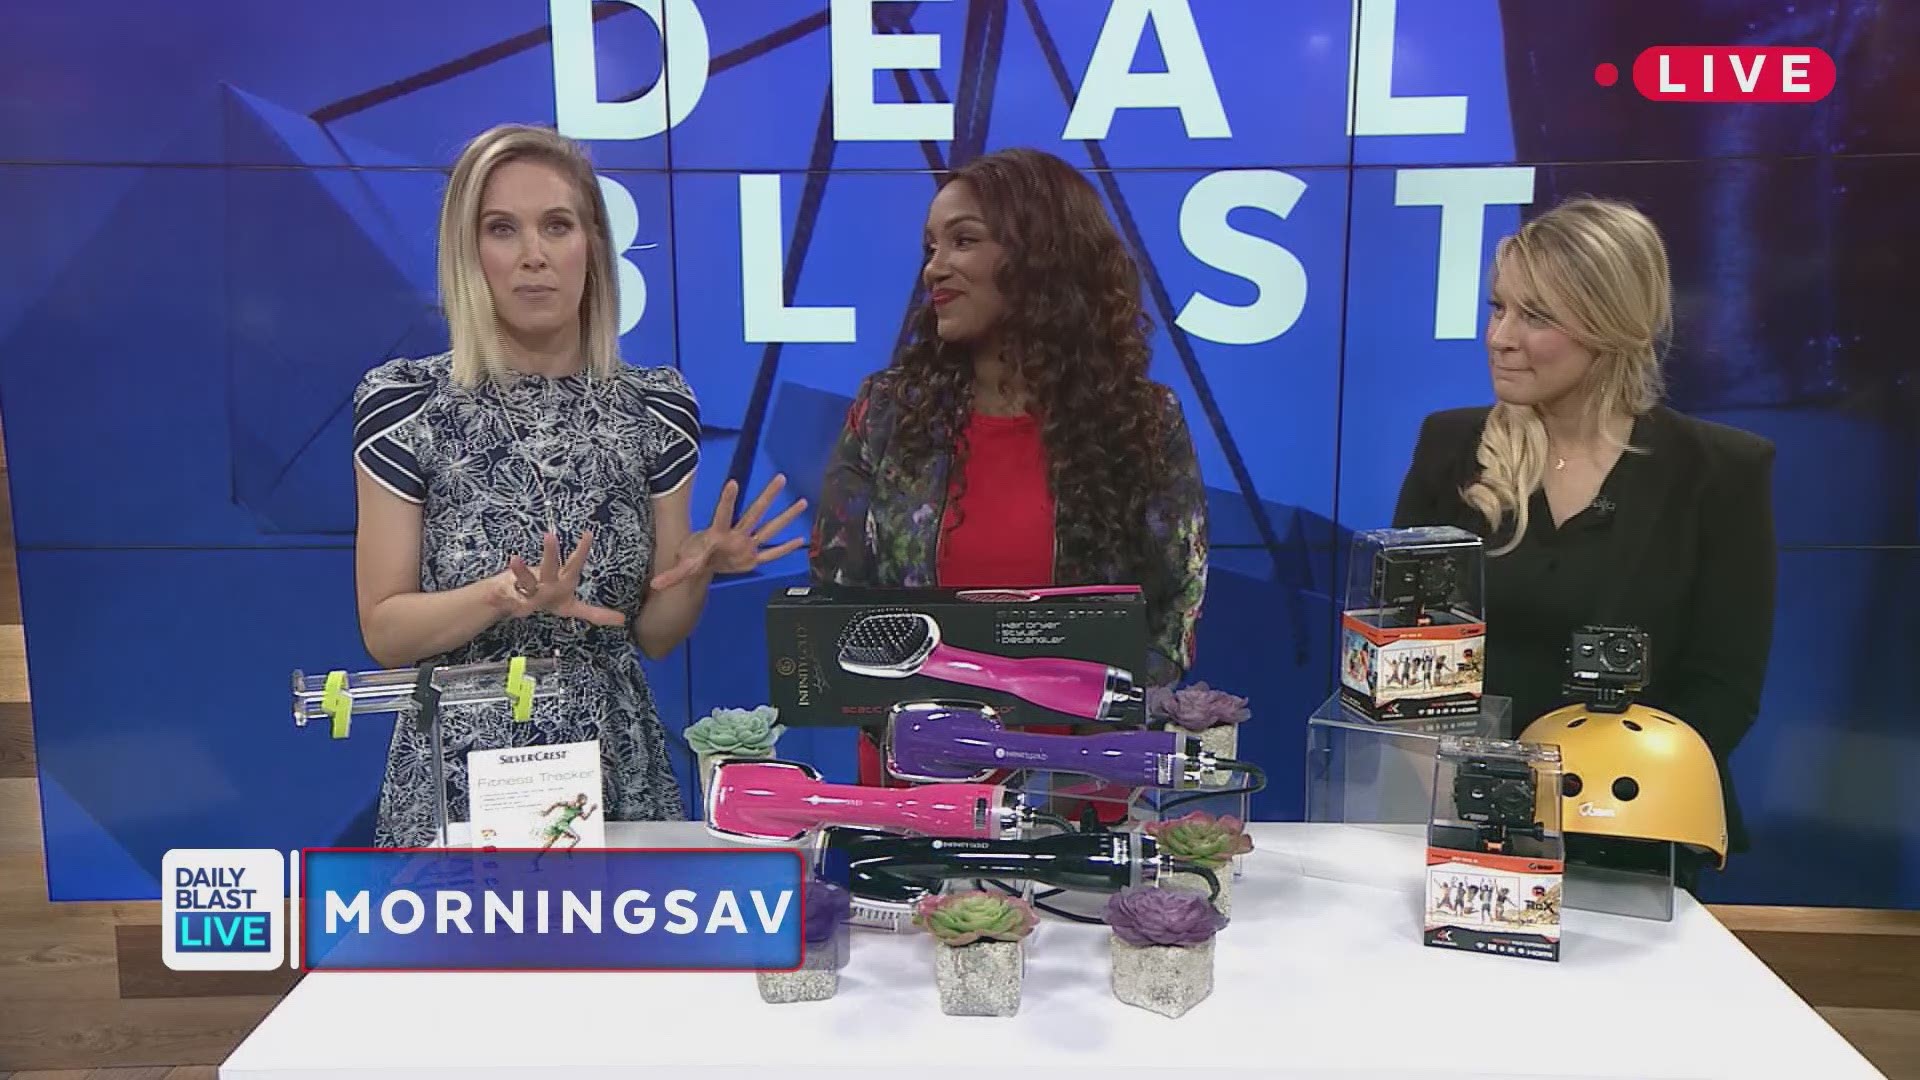 Looking for some Monday motivation? How about some amazing deals and steals on the hottest products. Daily Blast LIVE has partnered with MorningSave.com so share the best discounts on the market. All items are inspired by today's top trending stories so v